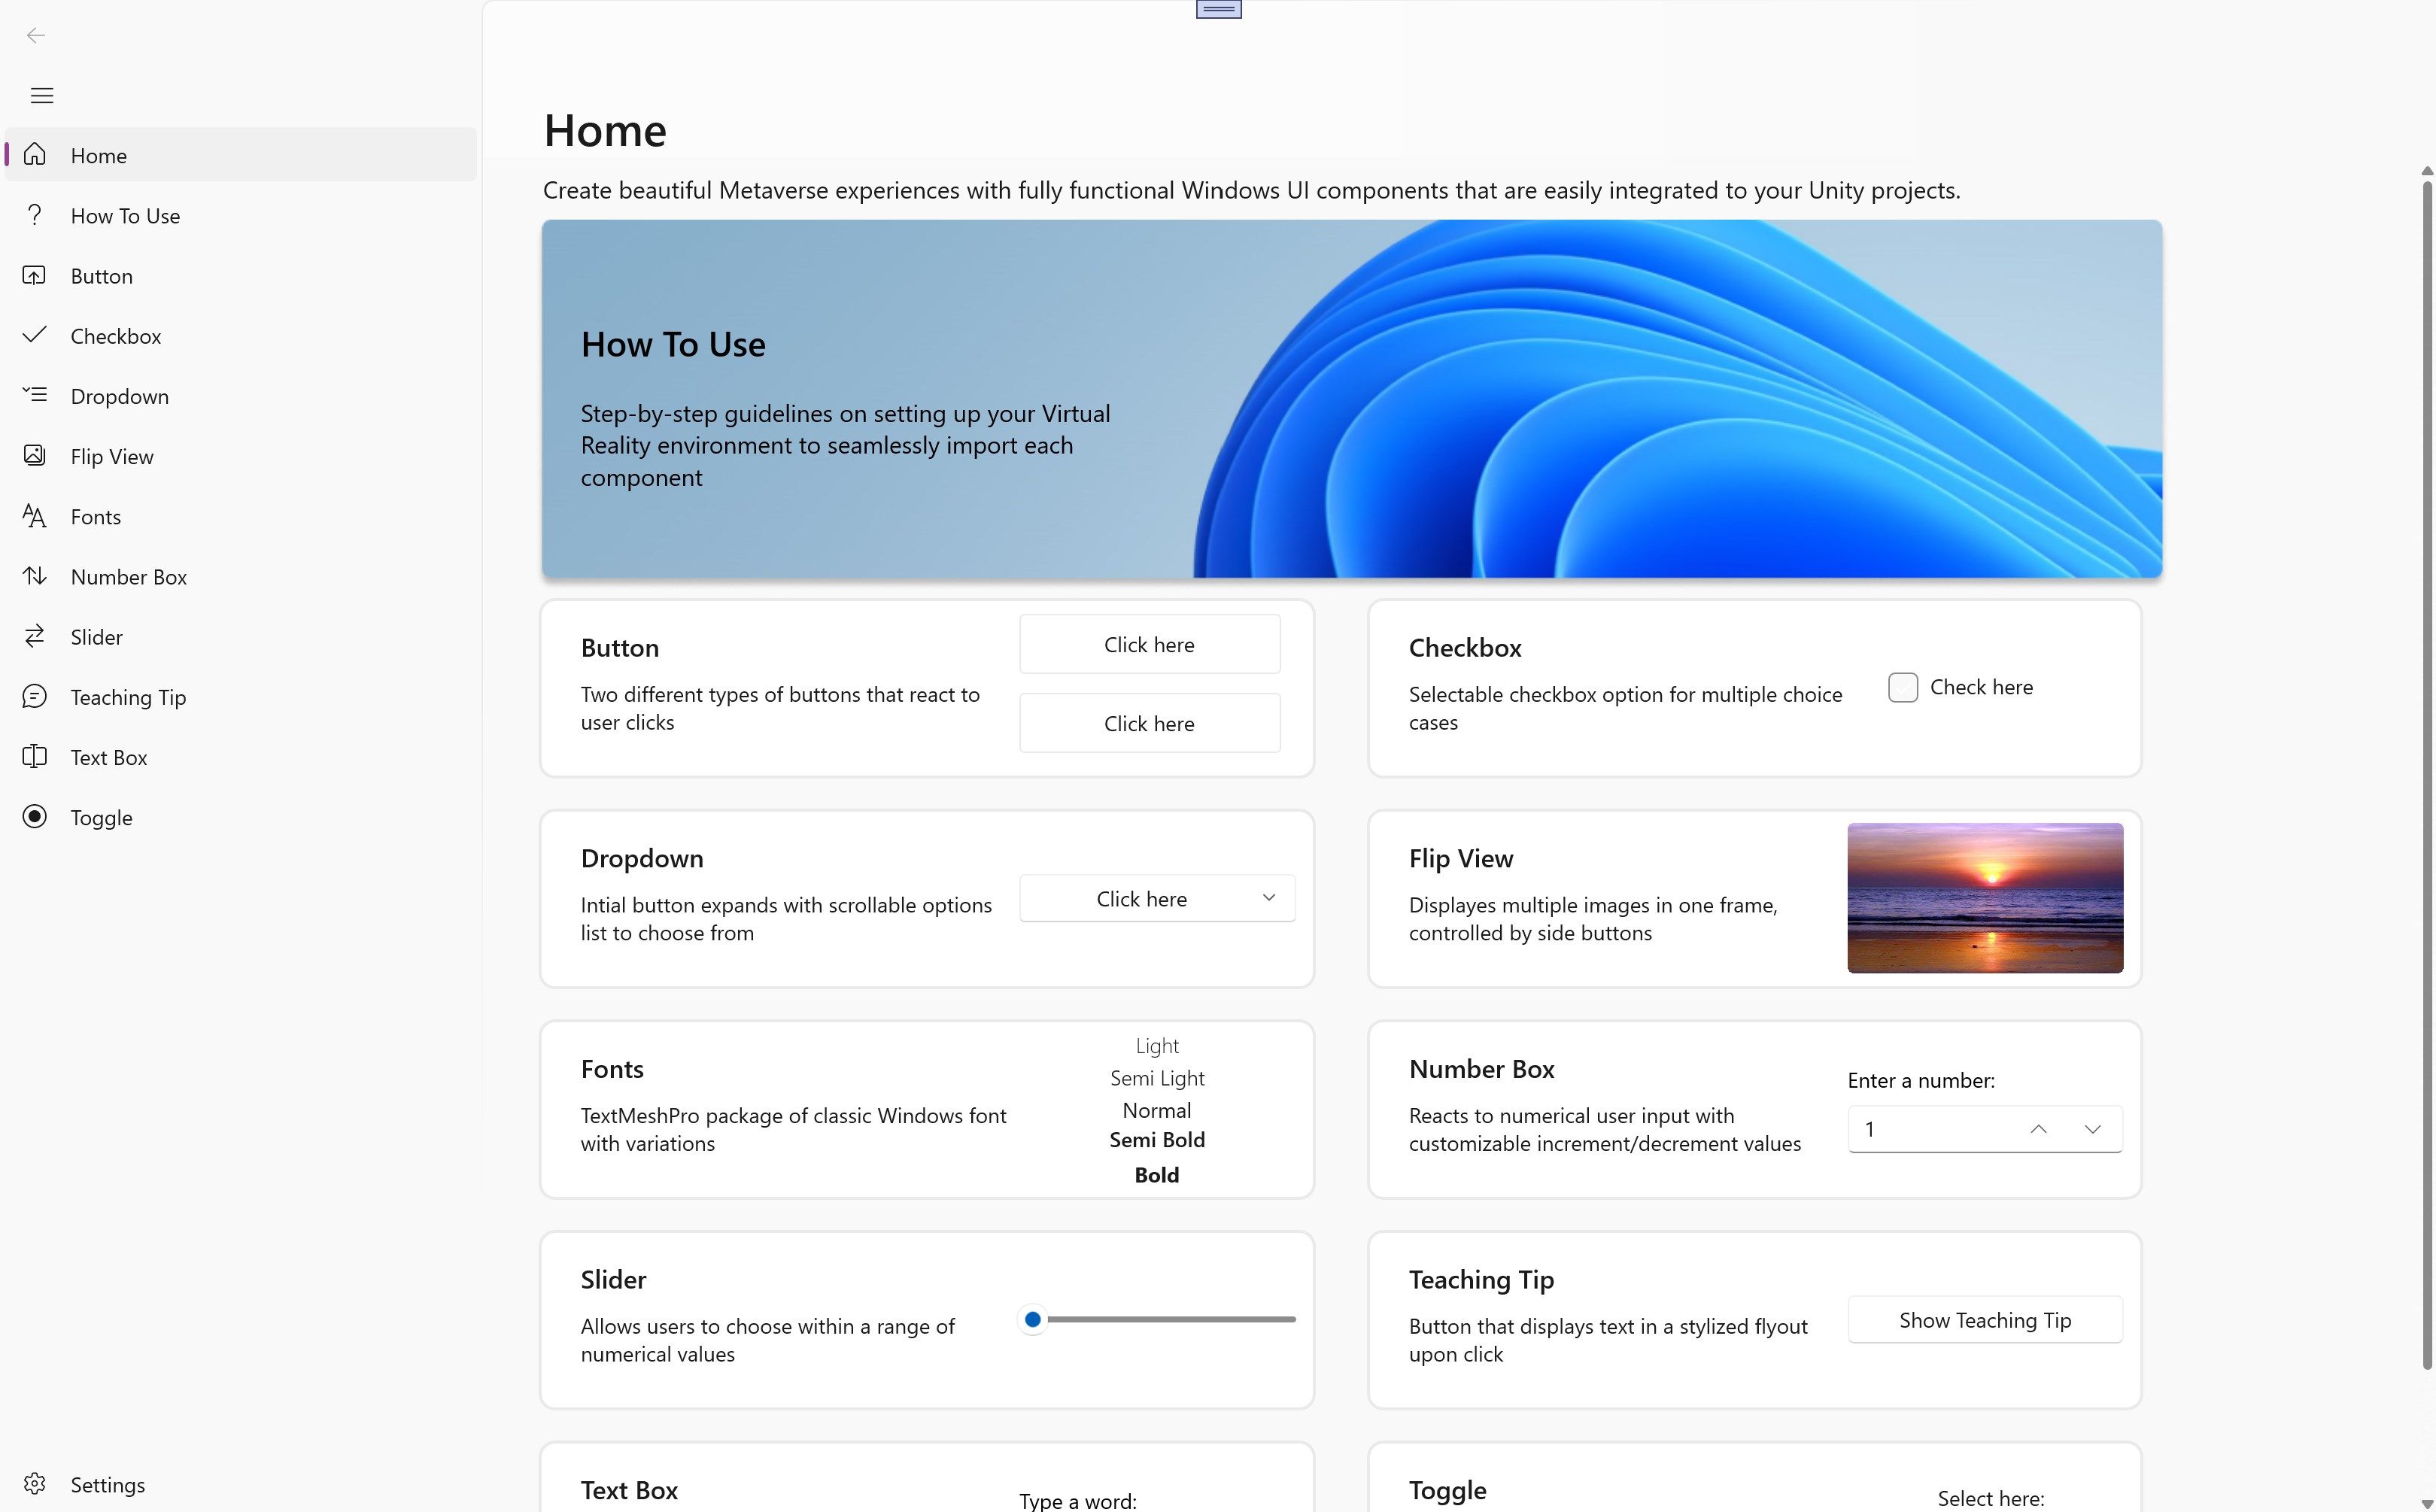 Home page displaying all components